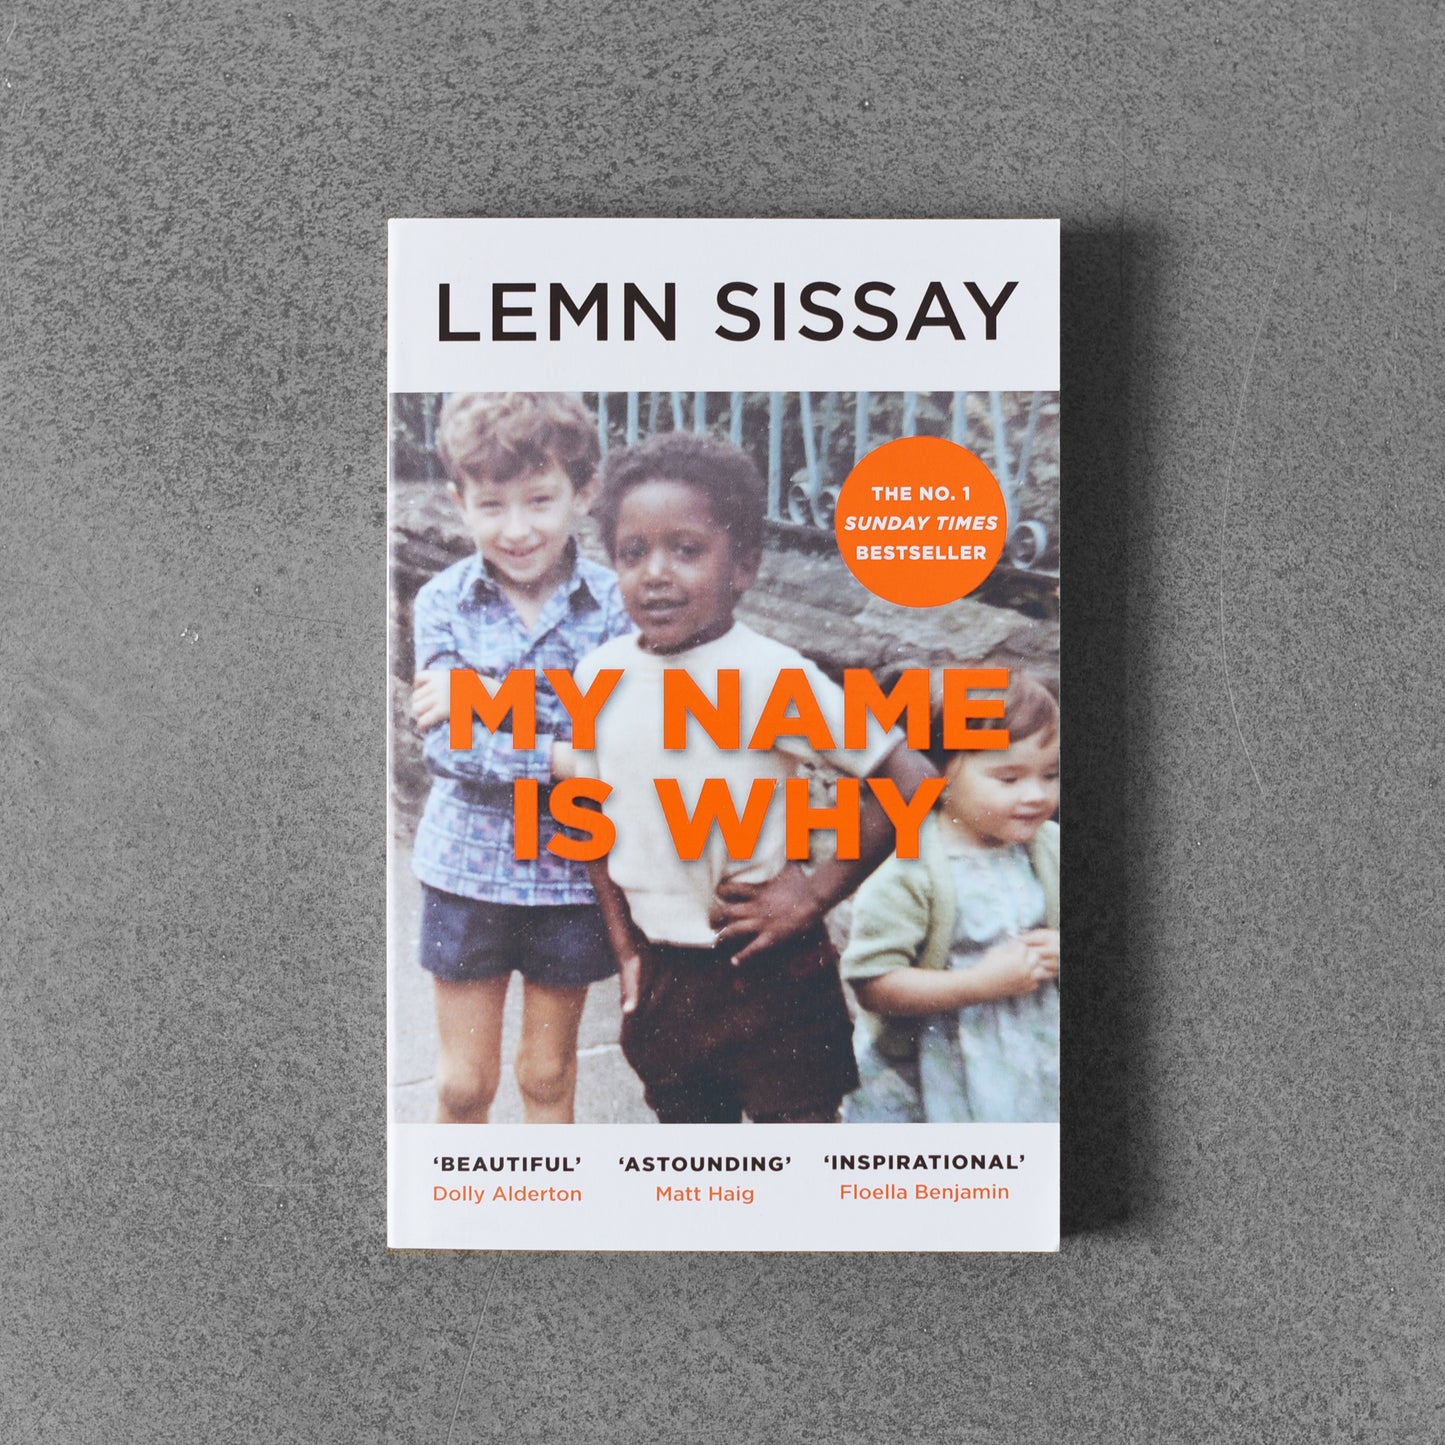 My Name Is Why - Lemn Sissay